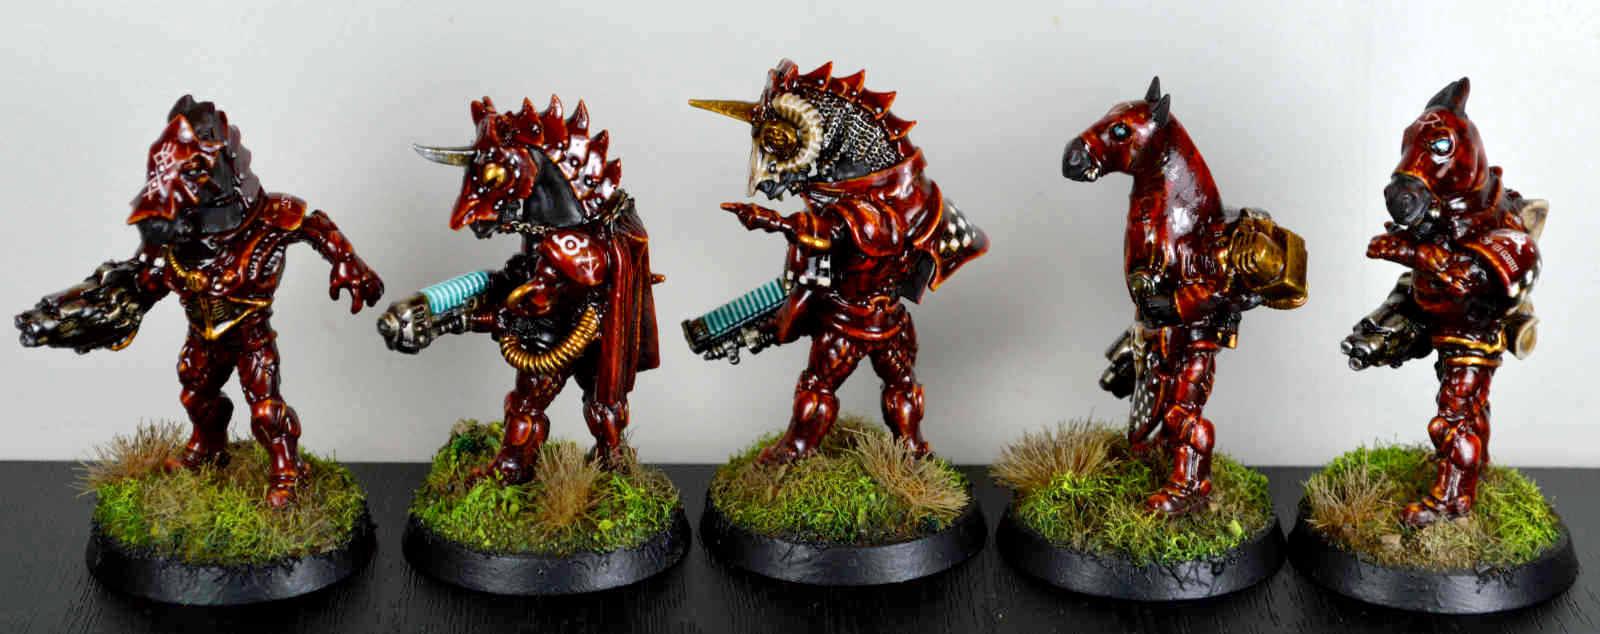 Chaos, Chaos Space Marines, Conversion, Horse Head, Kitbash, Mutant, Overlords, Proxy